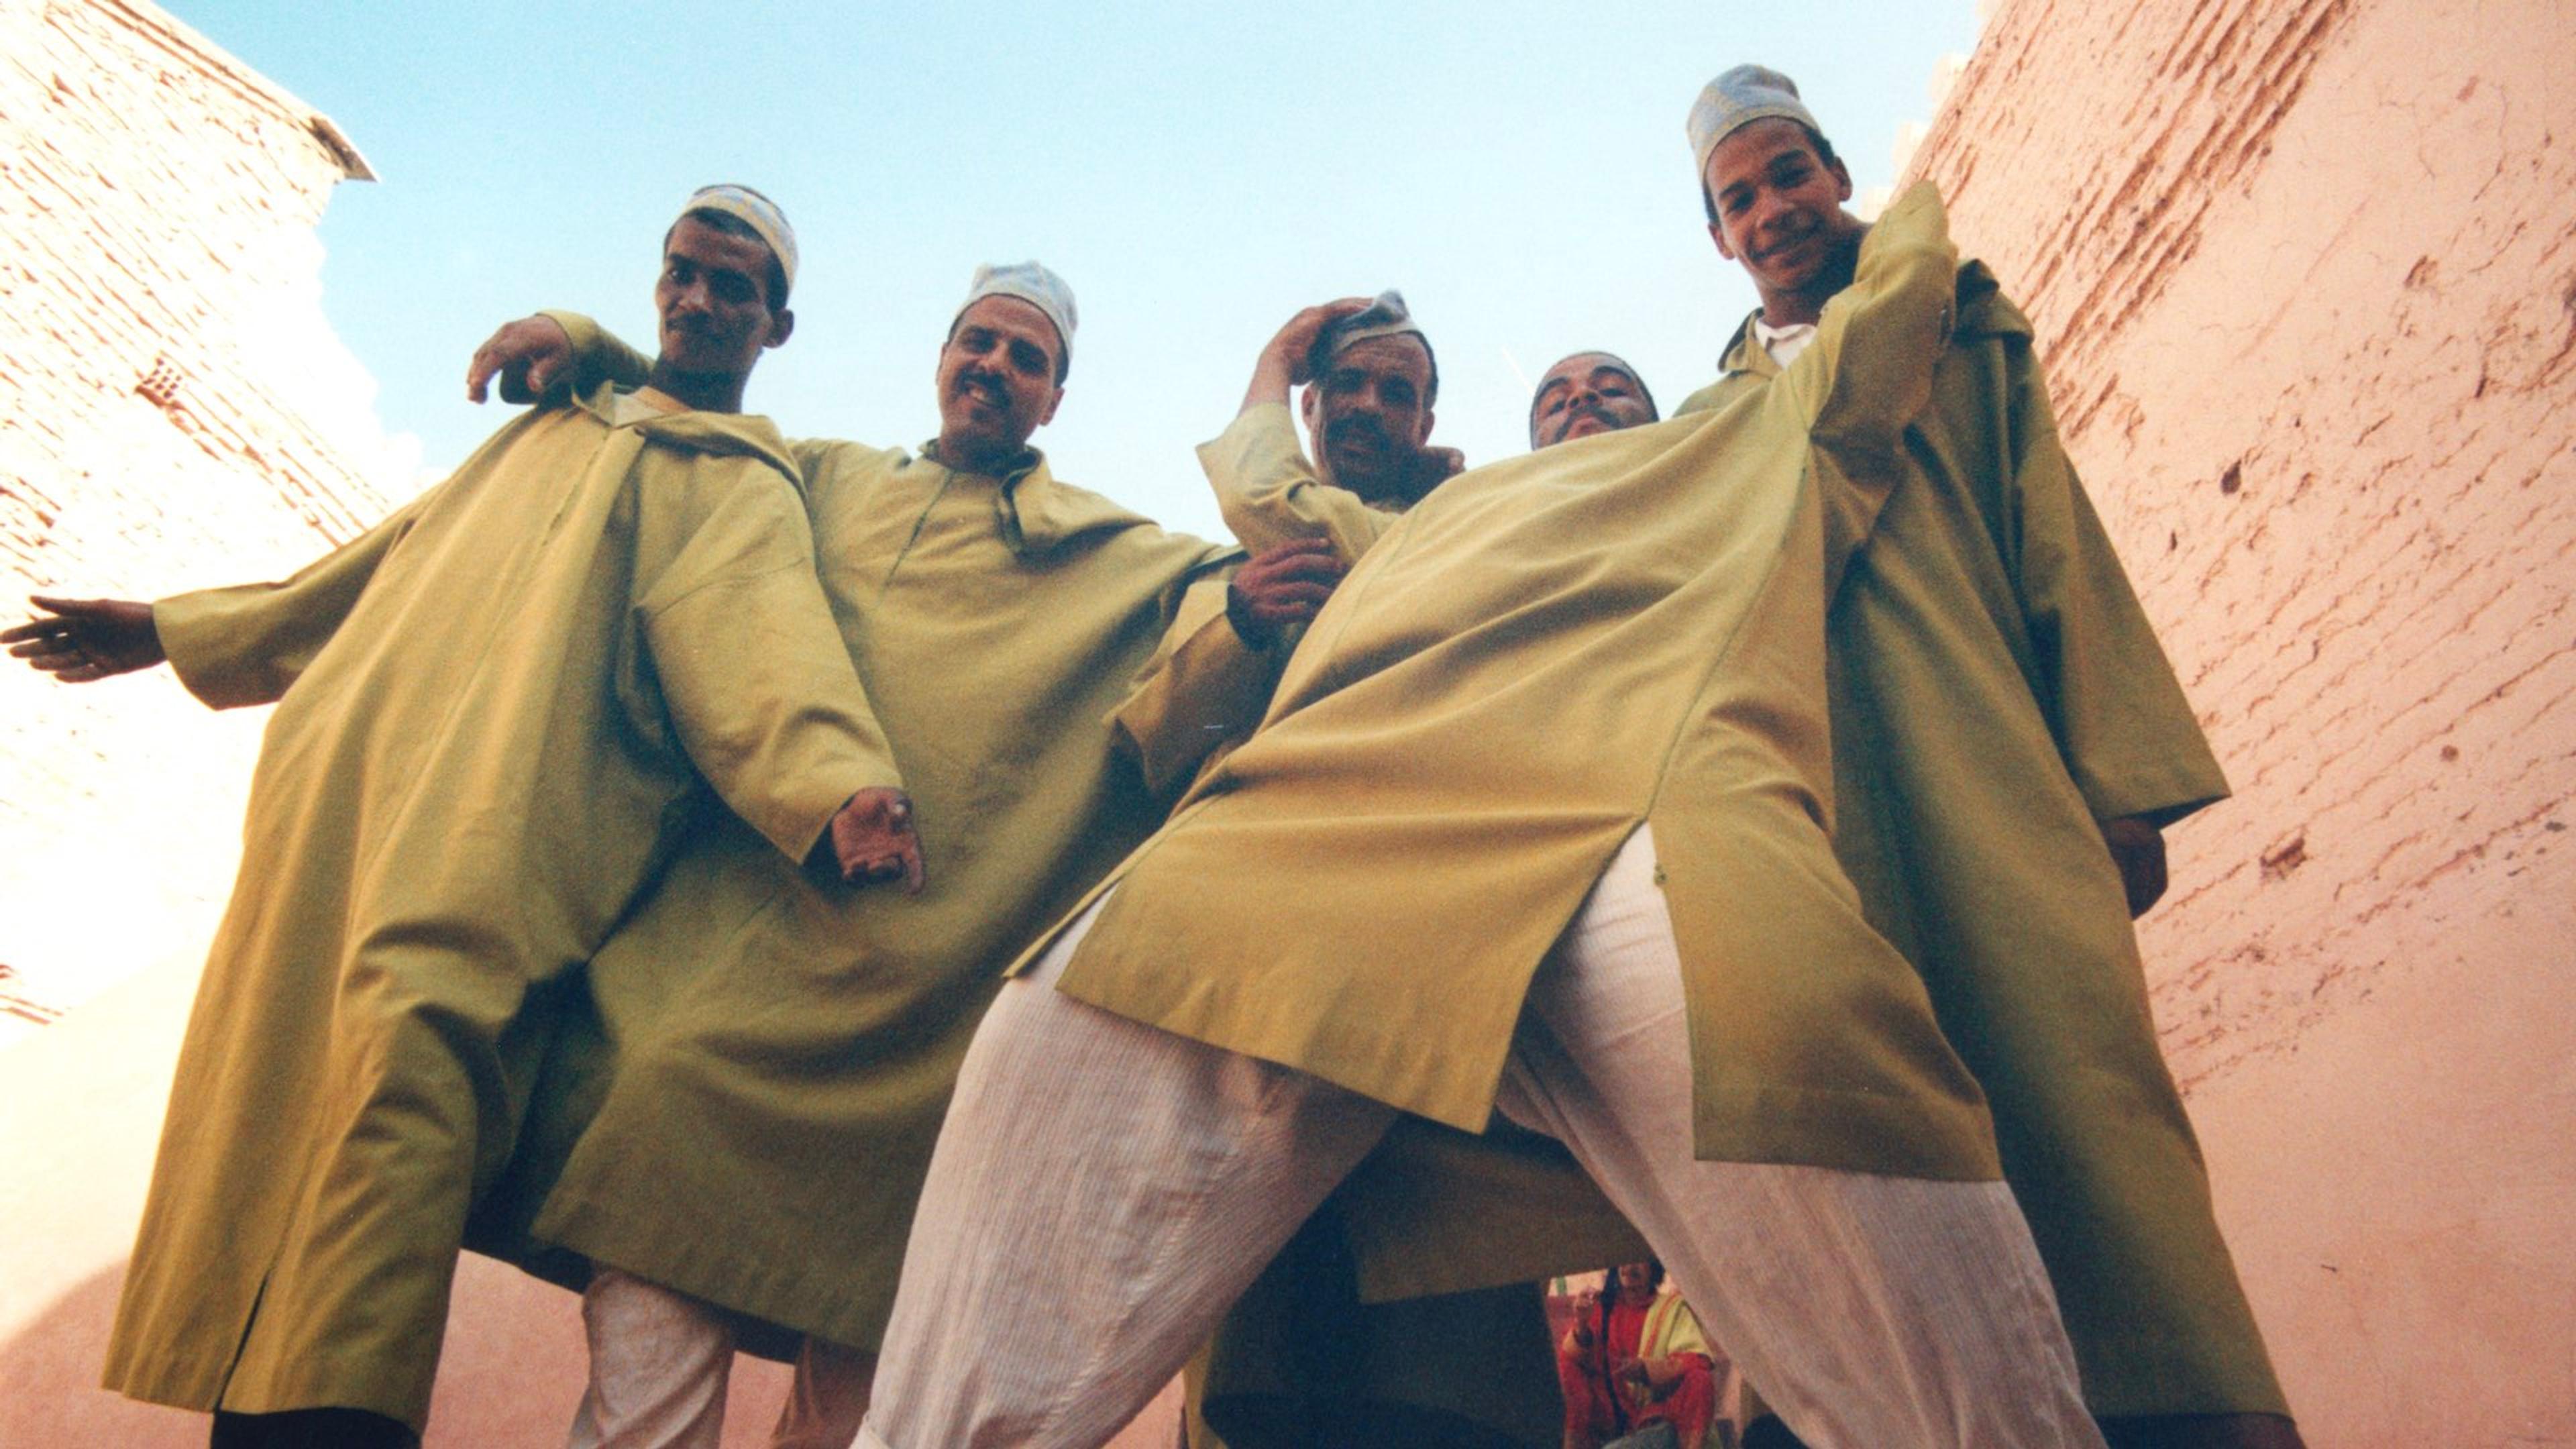 A photograph of a group of men wearing green djellabas and head coverings posing together